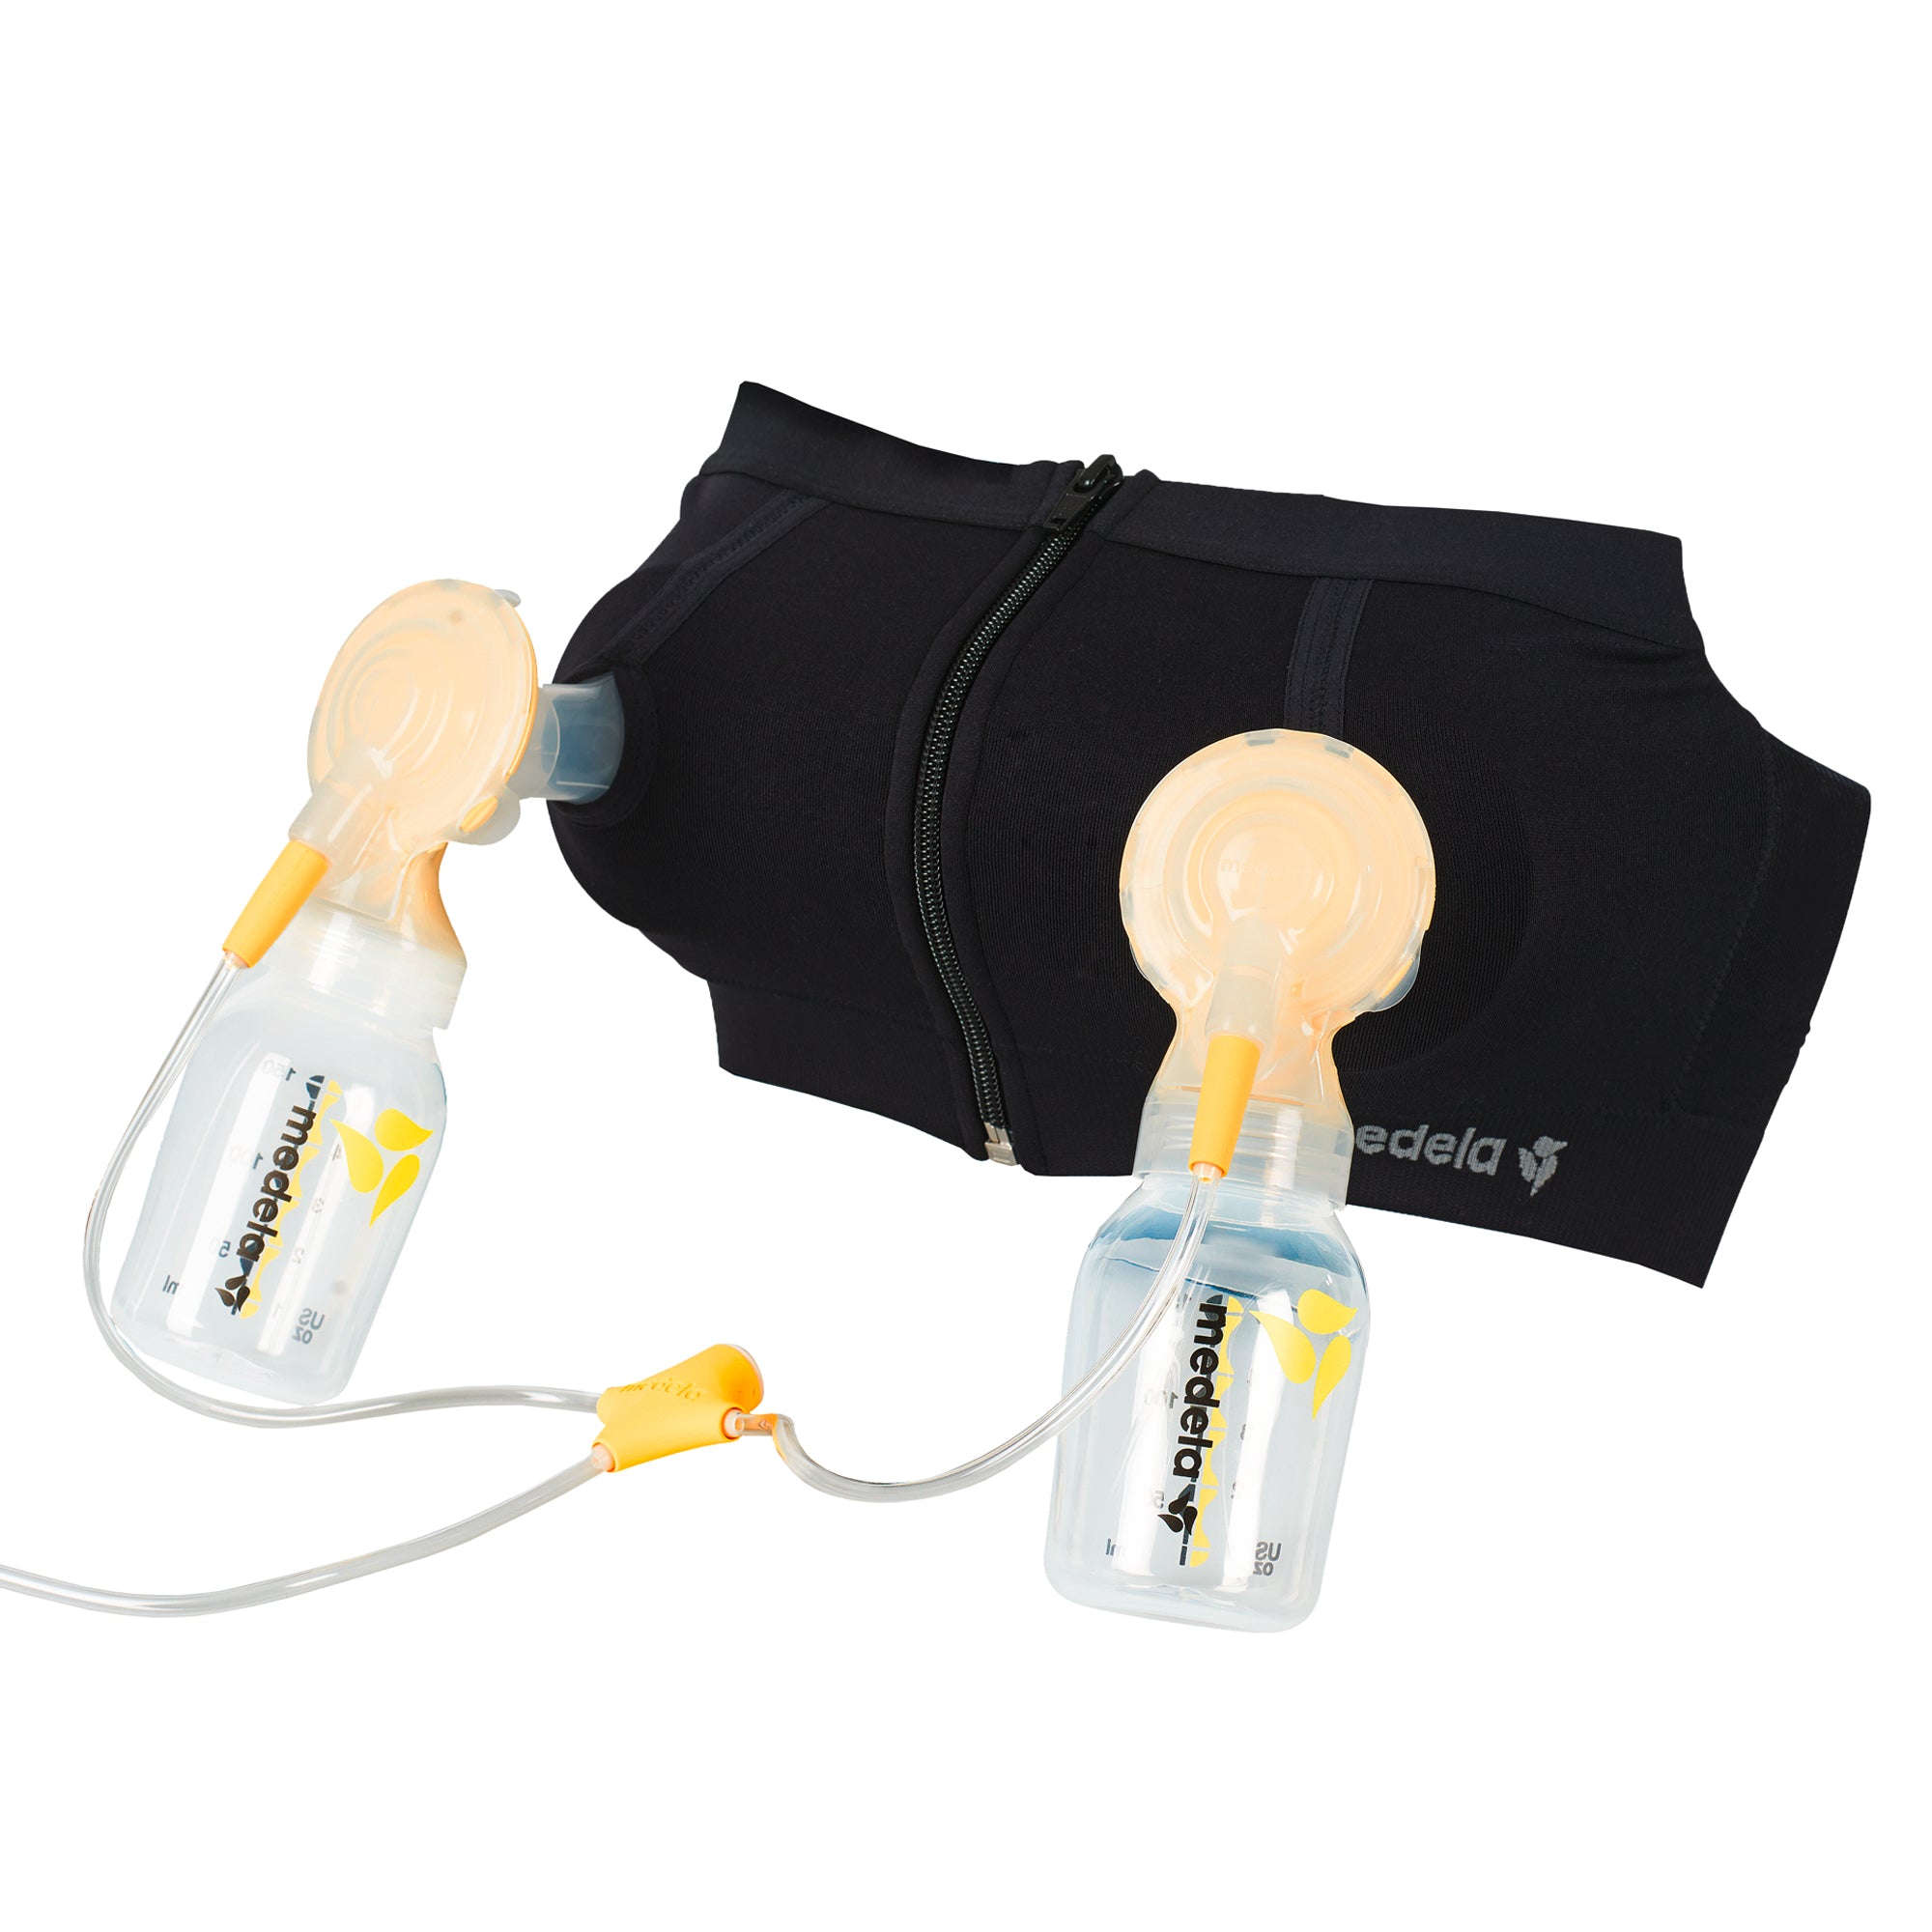 Buy Medela Easy Expression Bustier - Small Online